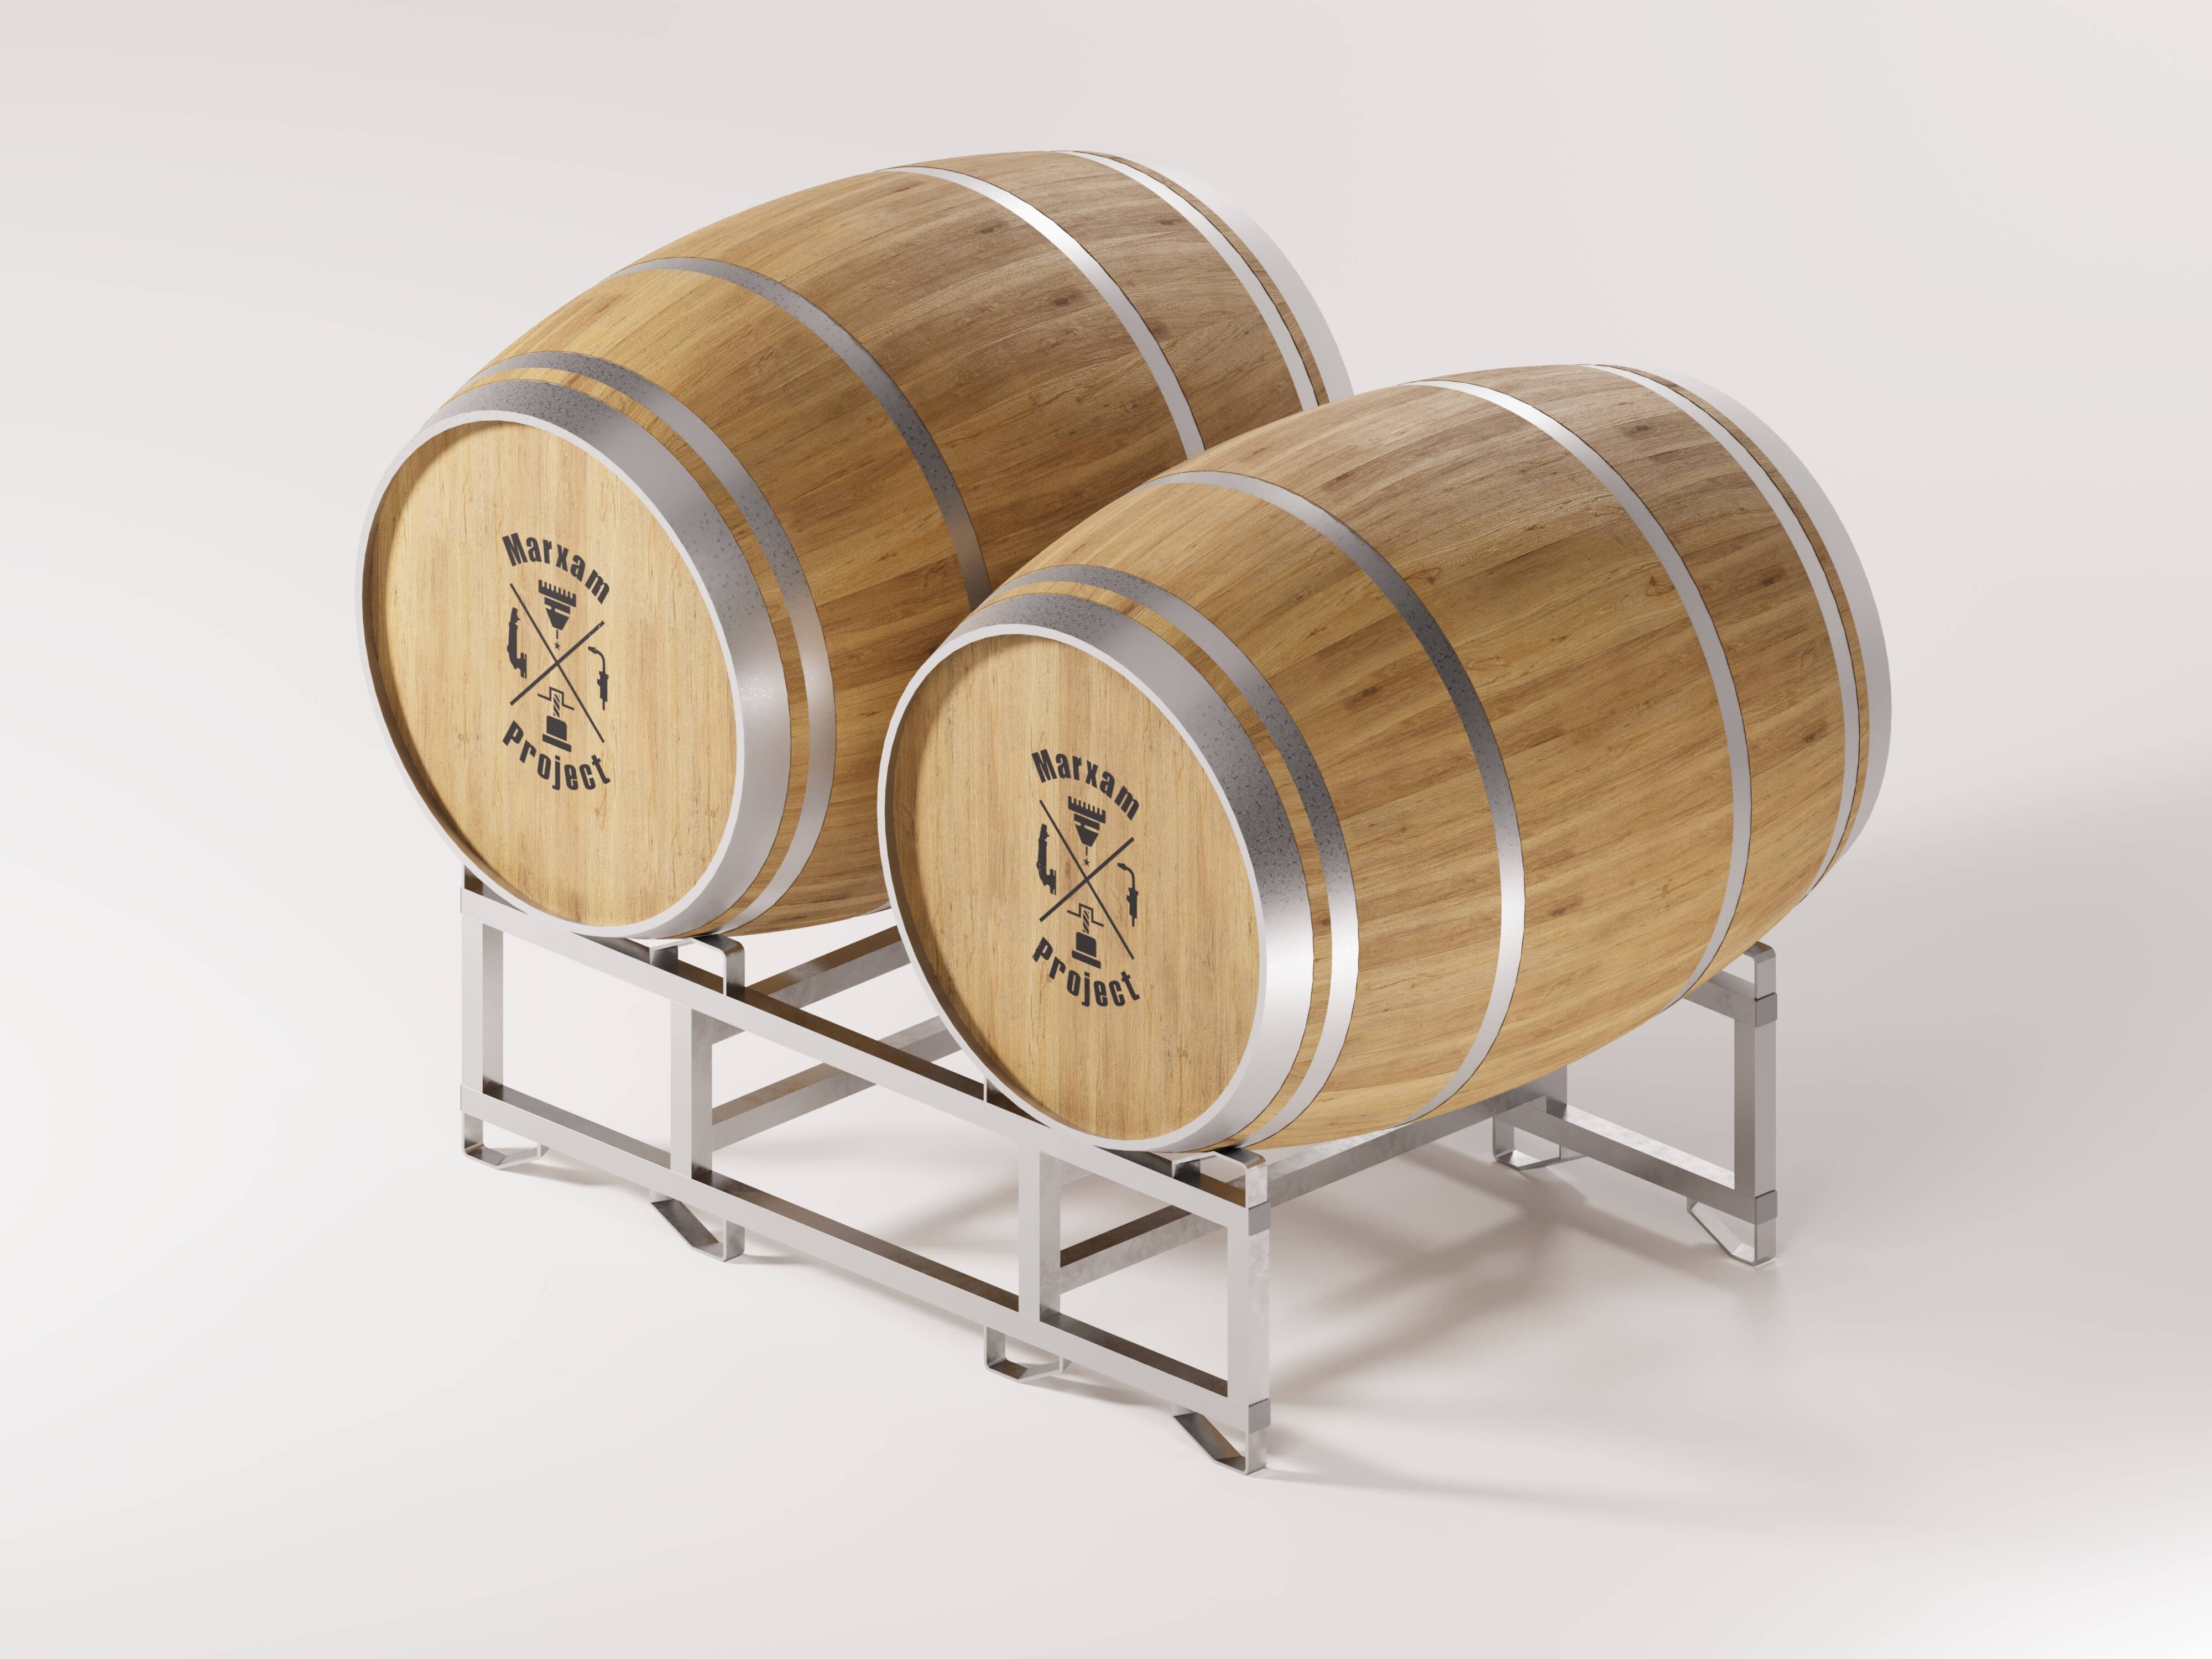 The picture displays a metal barrel storage rack holding two barrels made of wood, which are in excellent condition.